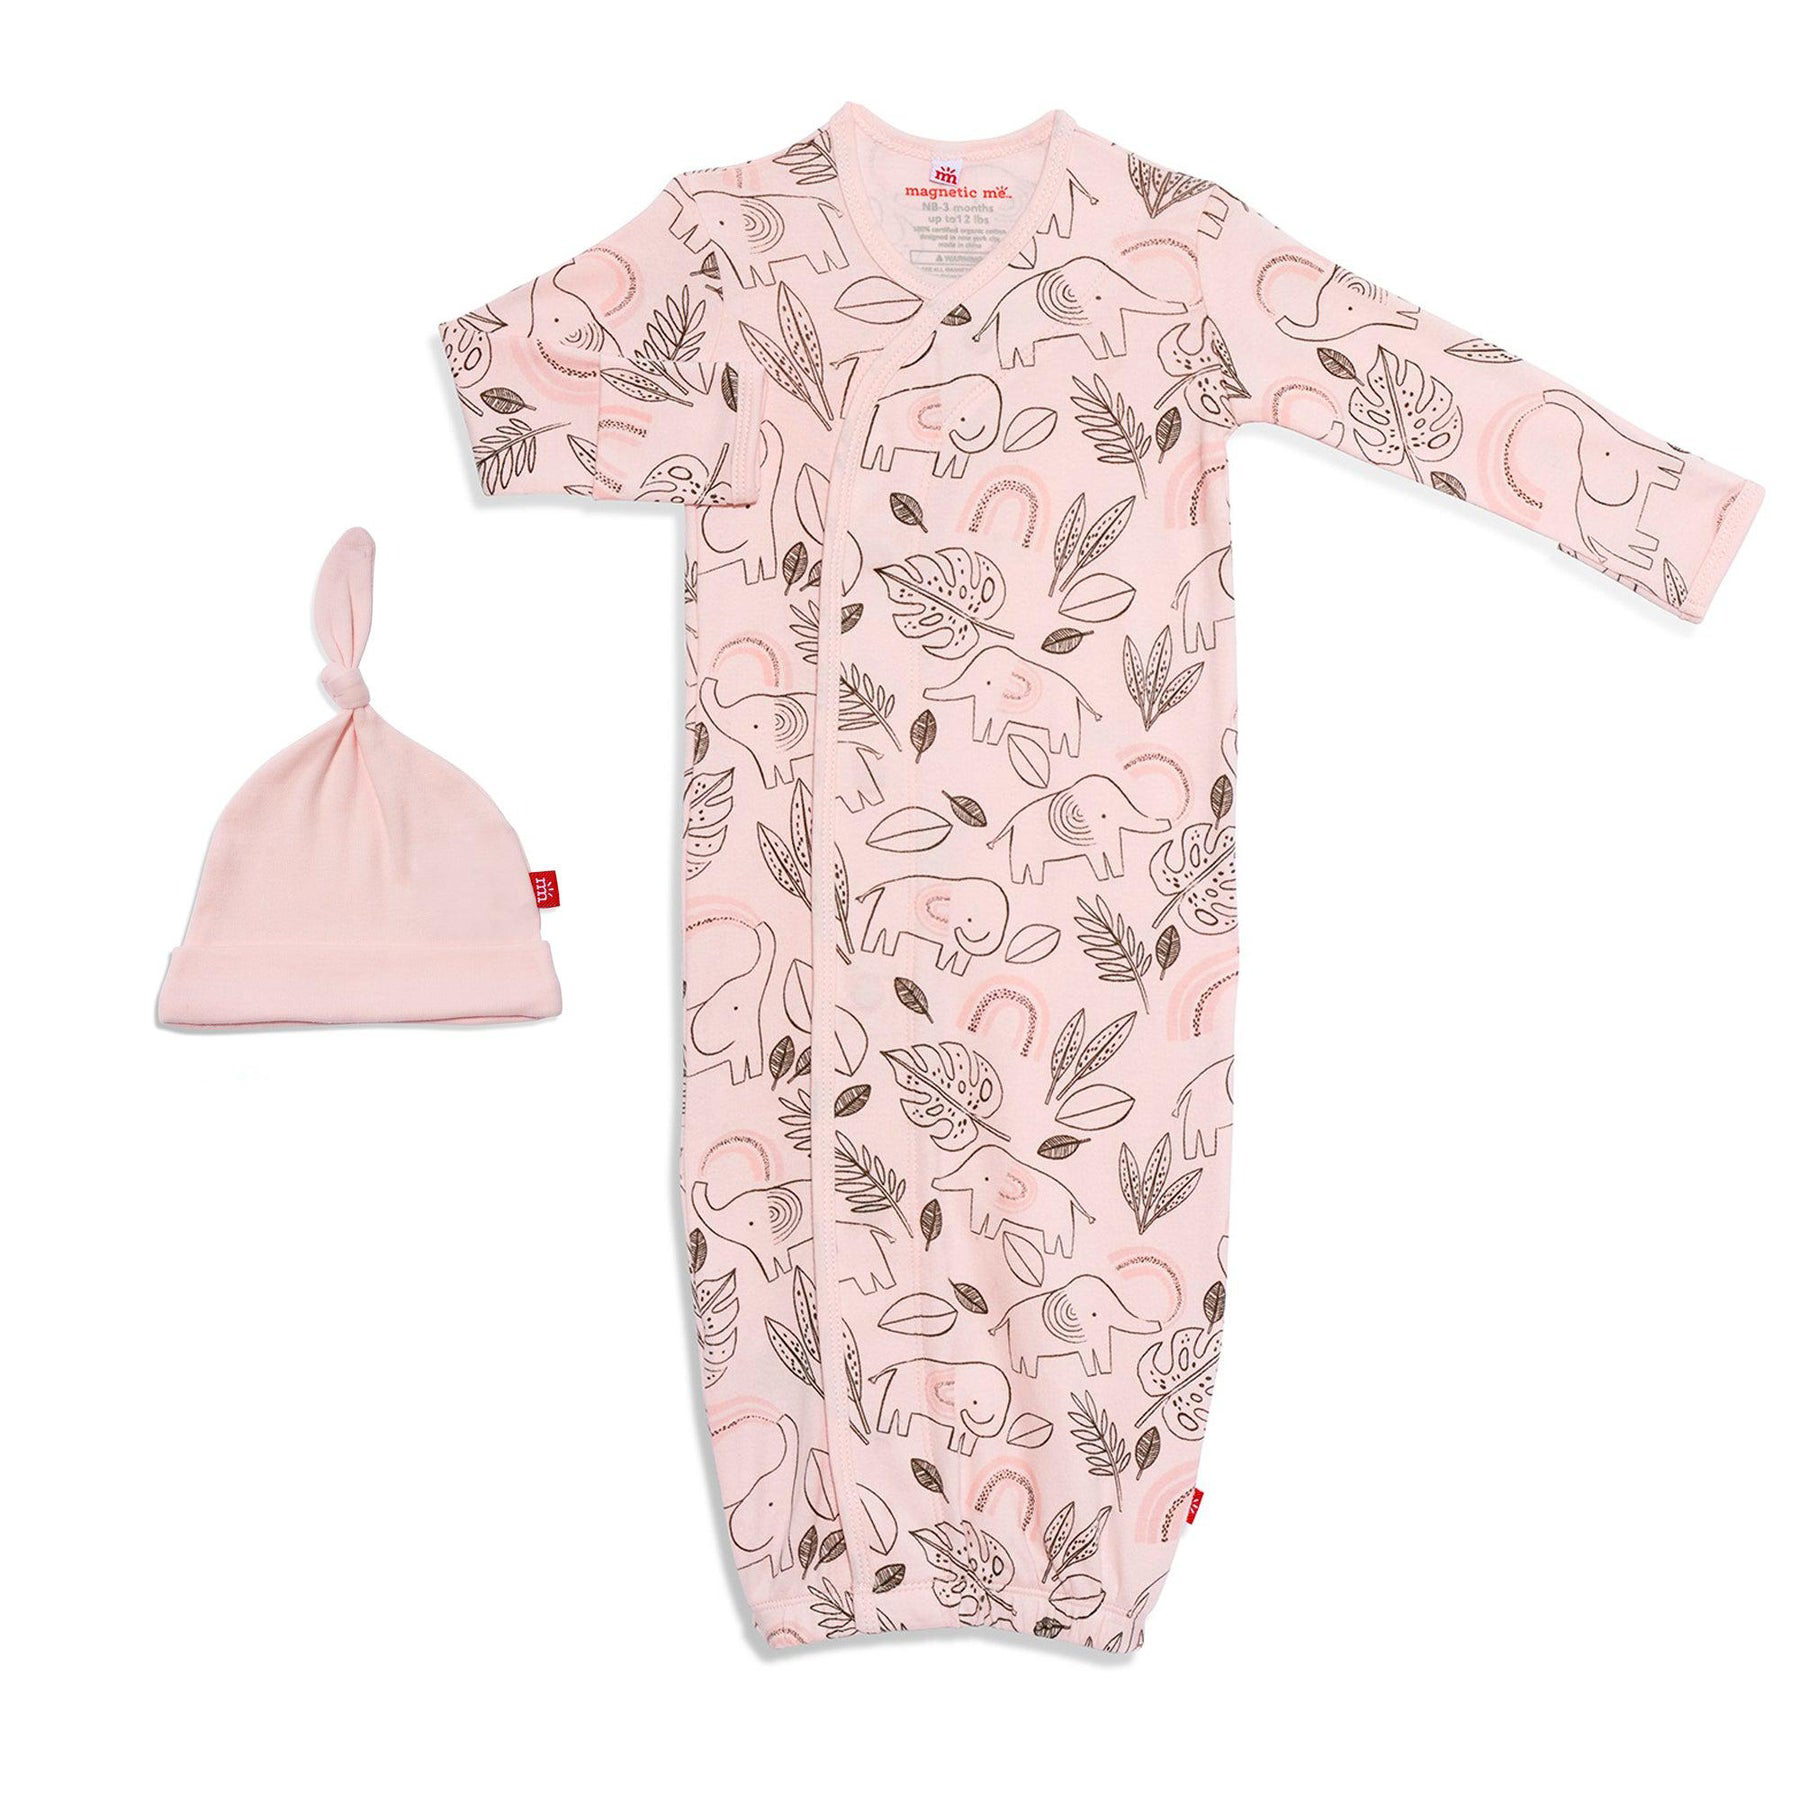 Ellie go lucky pink organic cotton magnetic gown & hat 1